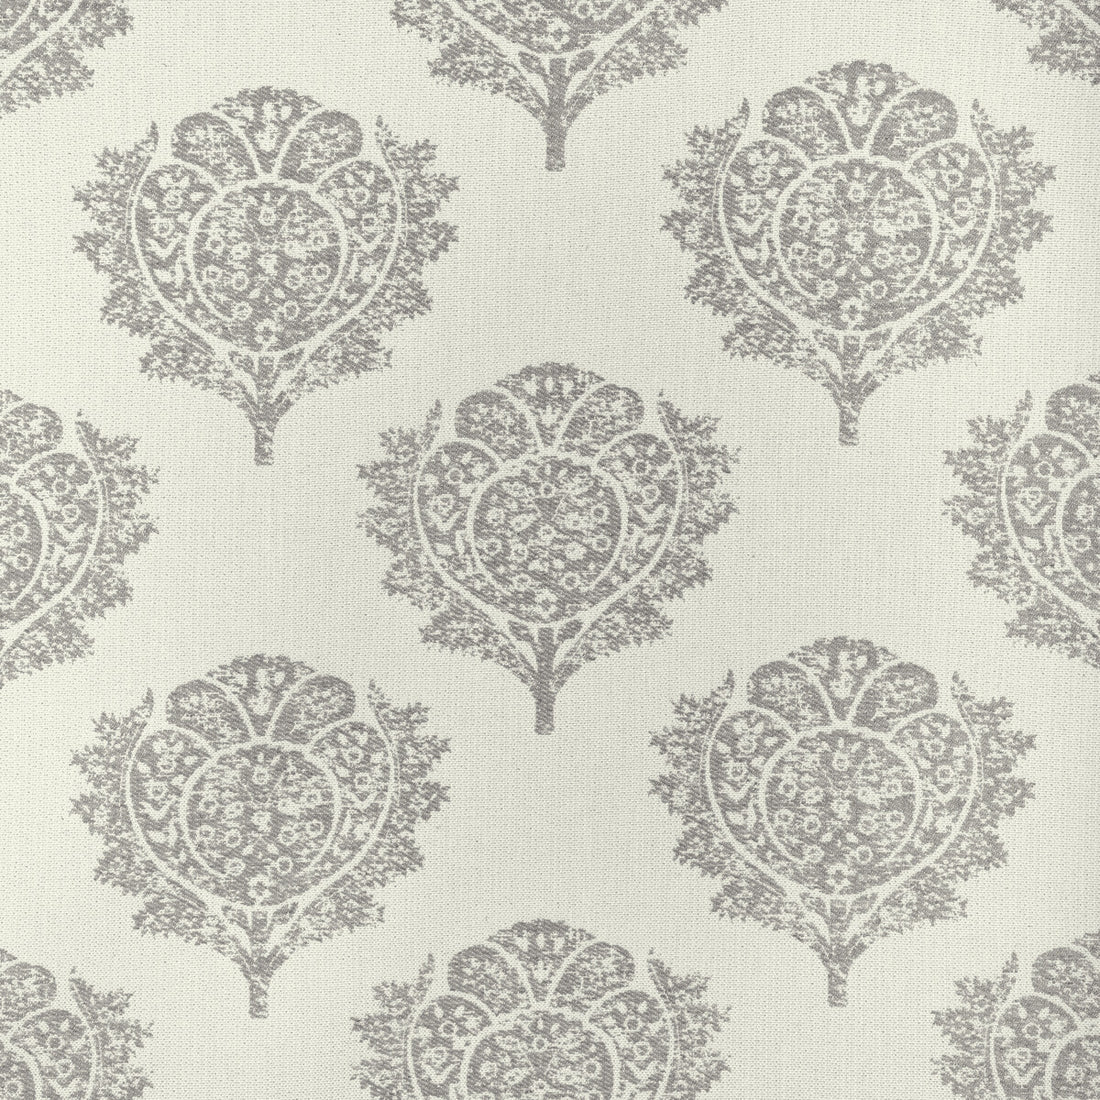 Heirlooms fabric in stone color - pattern 36864.11.0 - by Kravet Couture in the Atelier Weaves collection